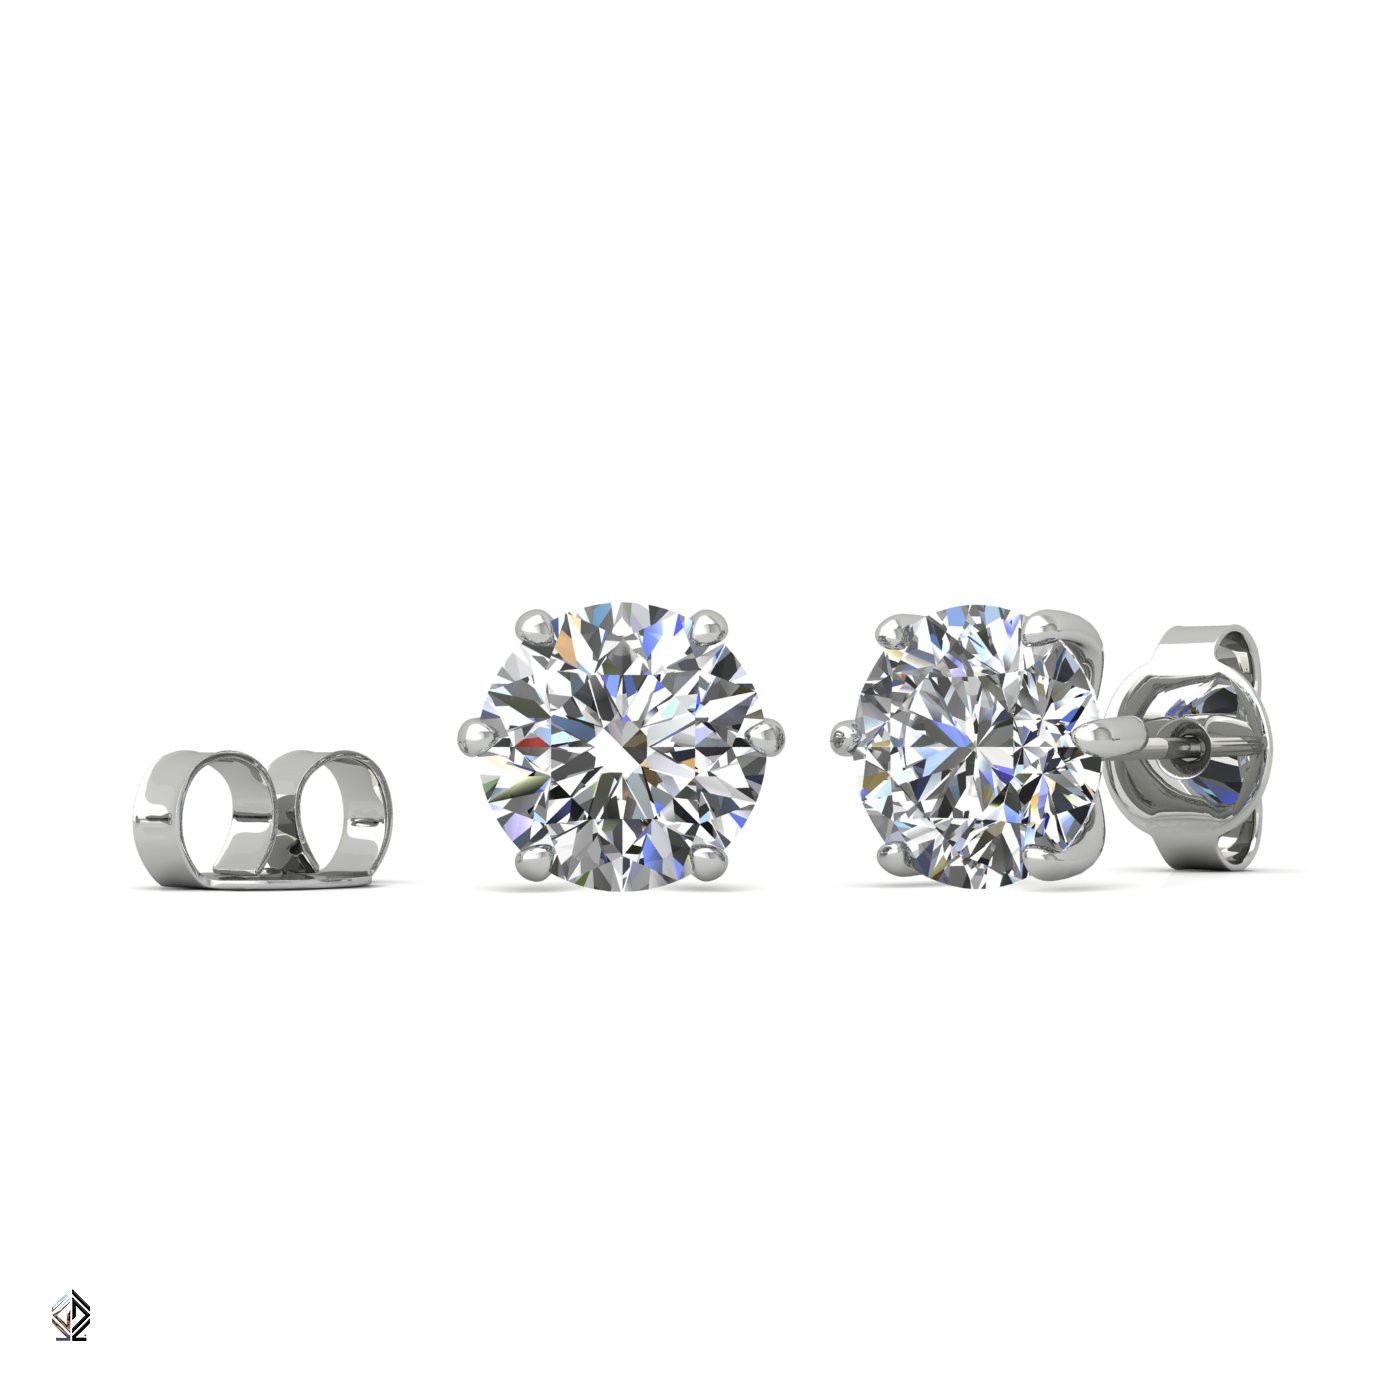 18k white gold 1.0 ct each (2,0 tcw) 6 prongs round shape diamond earrings Photos & images